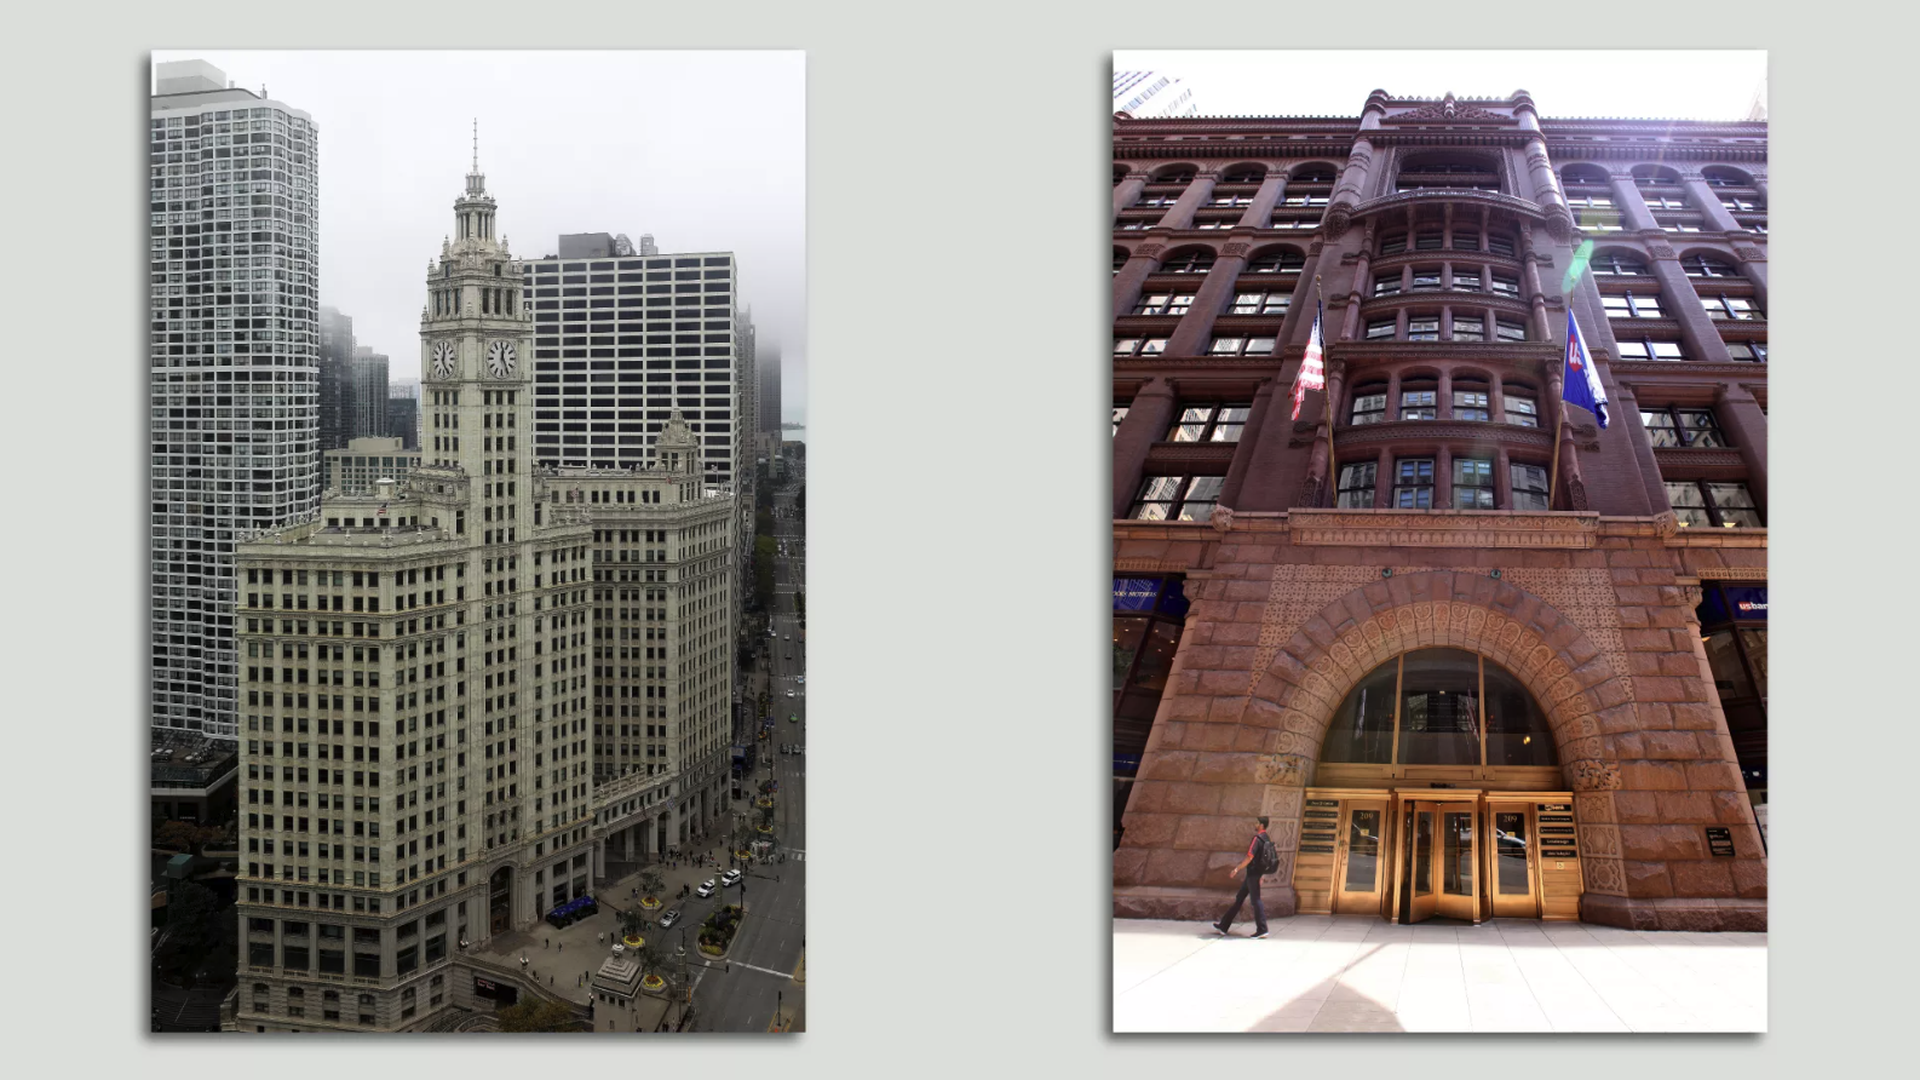 Wrigley Building (left) and The Rookery Building. Photos: Raymond Boyd/Getty Images